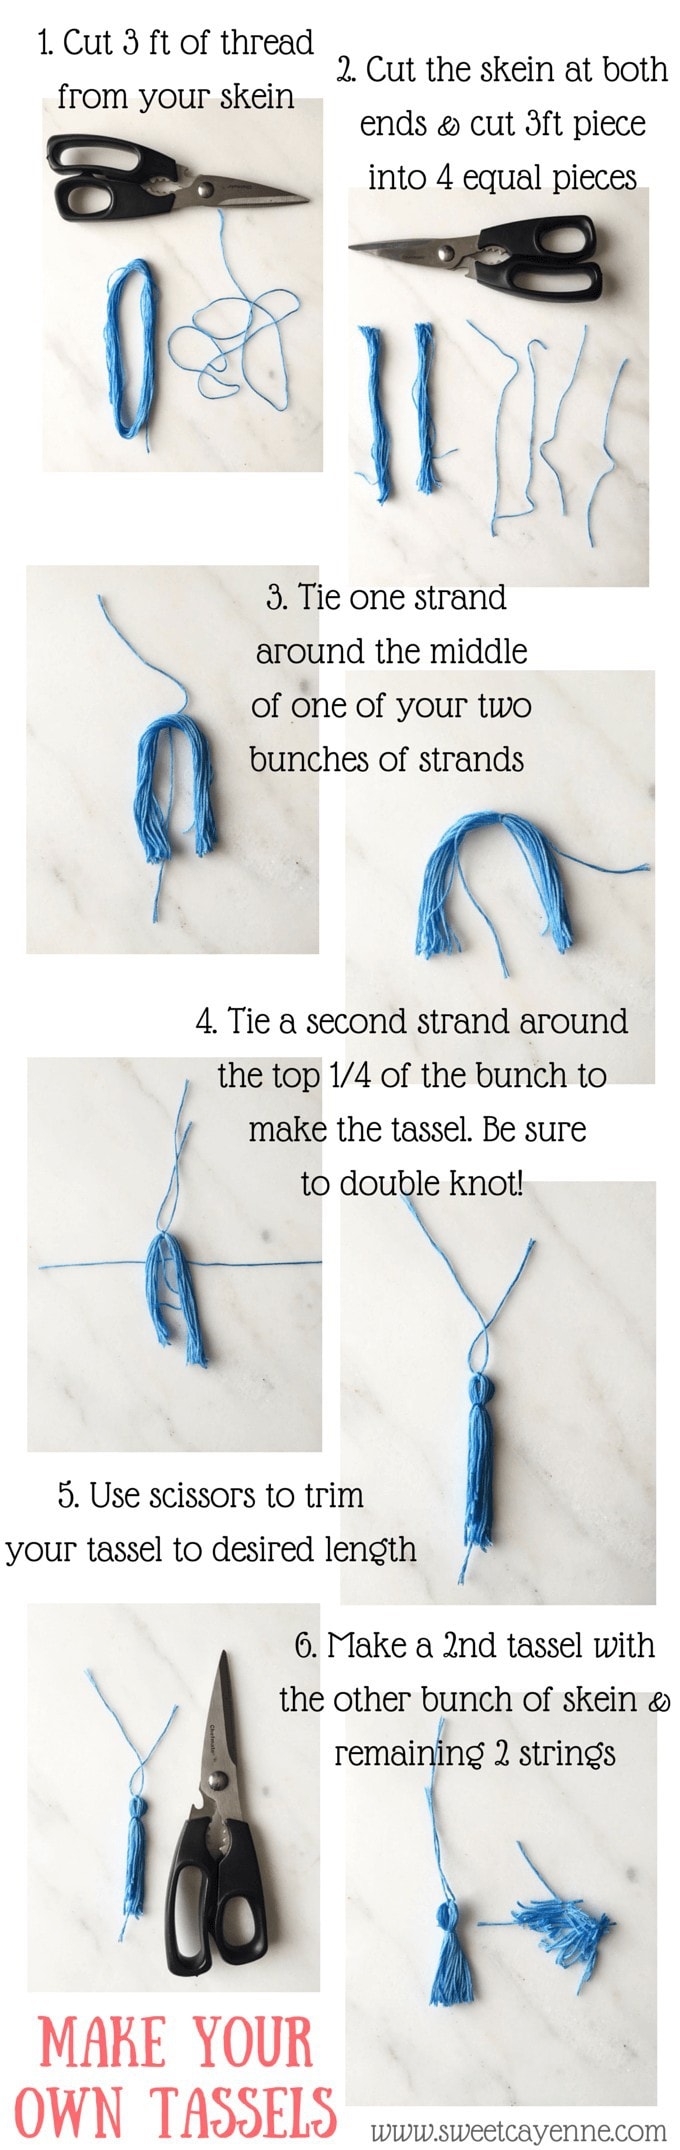 Step-by-step instructions for making your own tassels - add to accessories, purses, pillows, you name it! From sweetcayenne.com